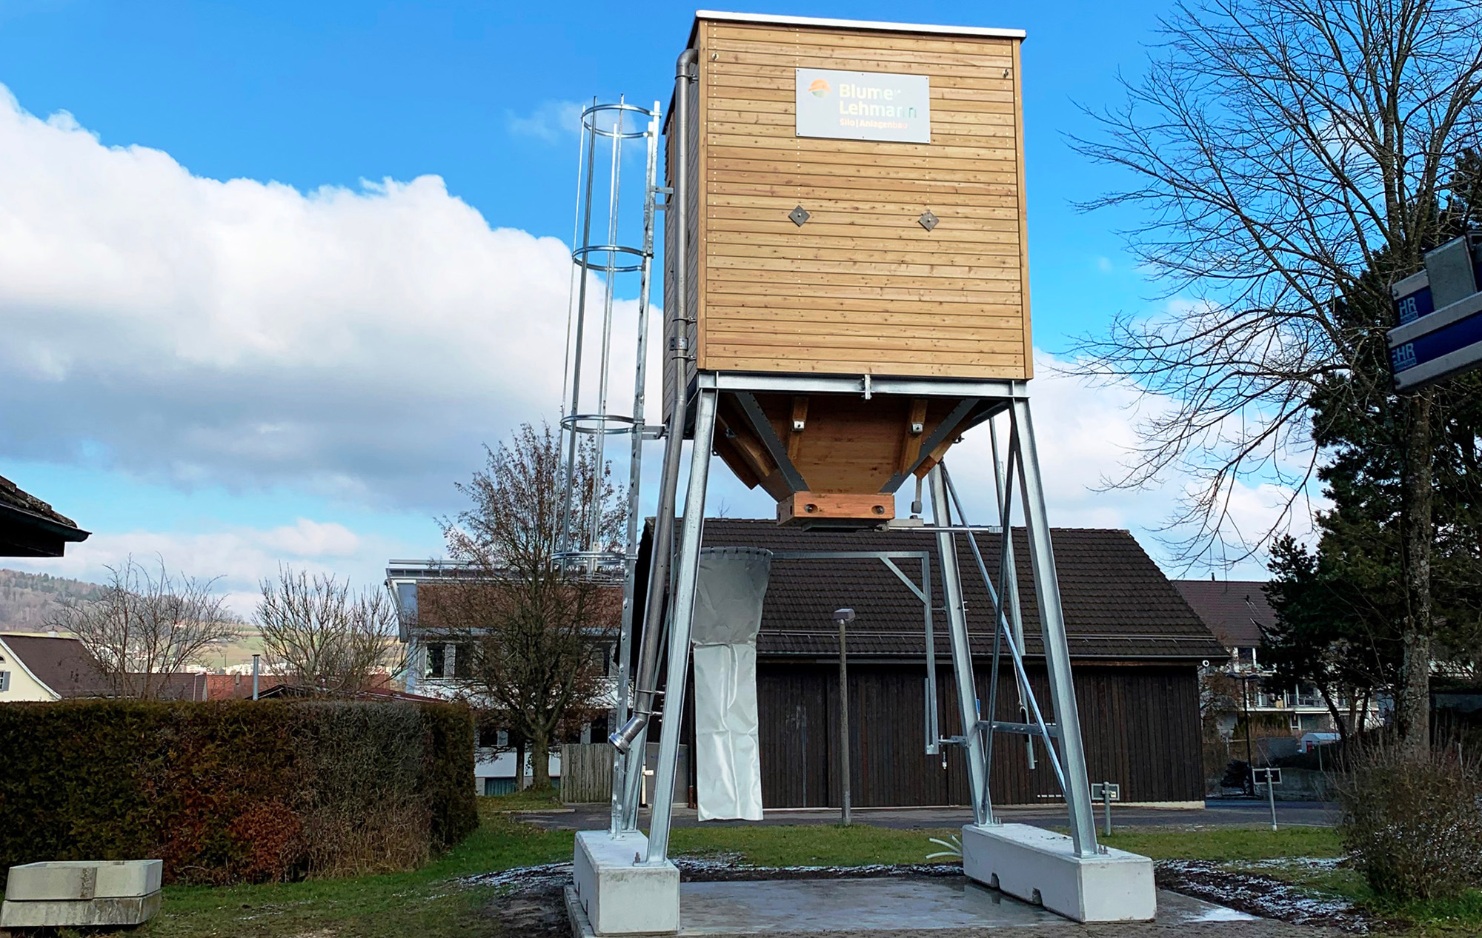 Small wooden silo with a volume of 20m3 for grit in the municipality of Dällikon